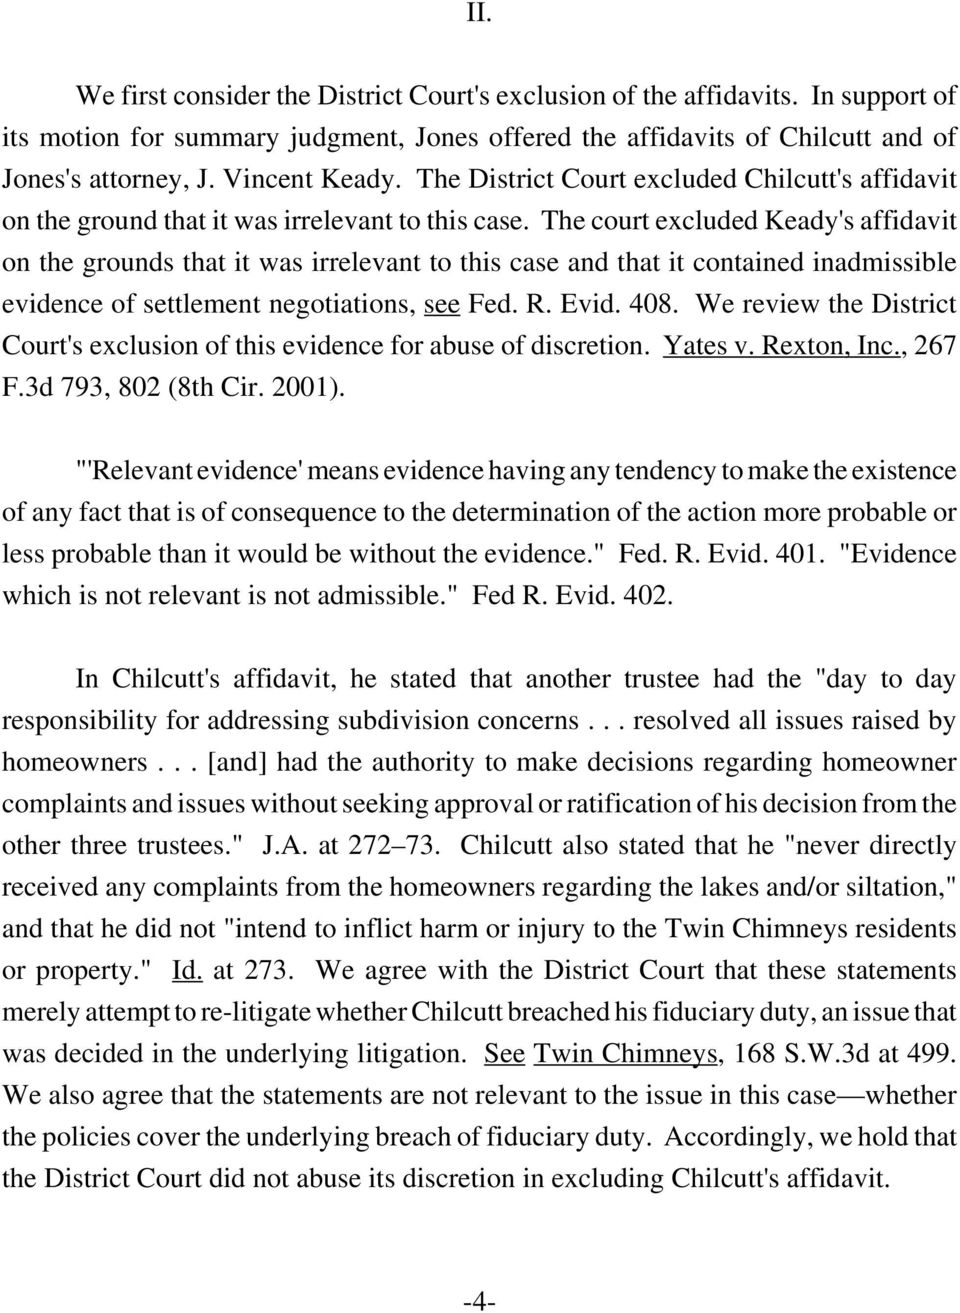 The court excluded Keady's affidavit on the grounds that it was irrelevant to this case and that it contained inadmissible evidence of settlement negotiations, see Fed. R. Evid. 408.